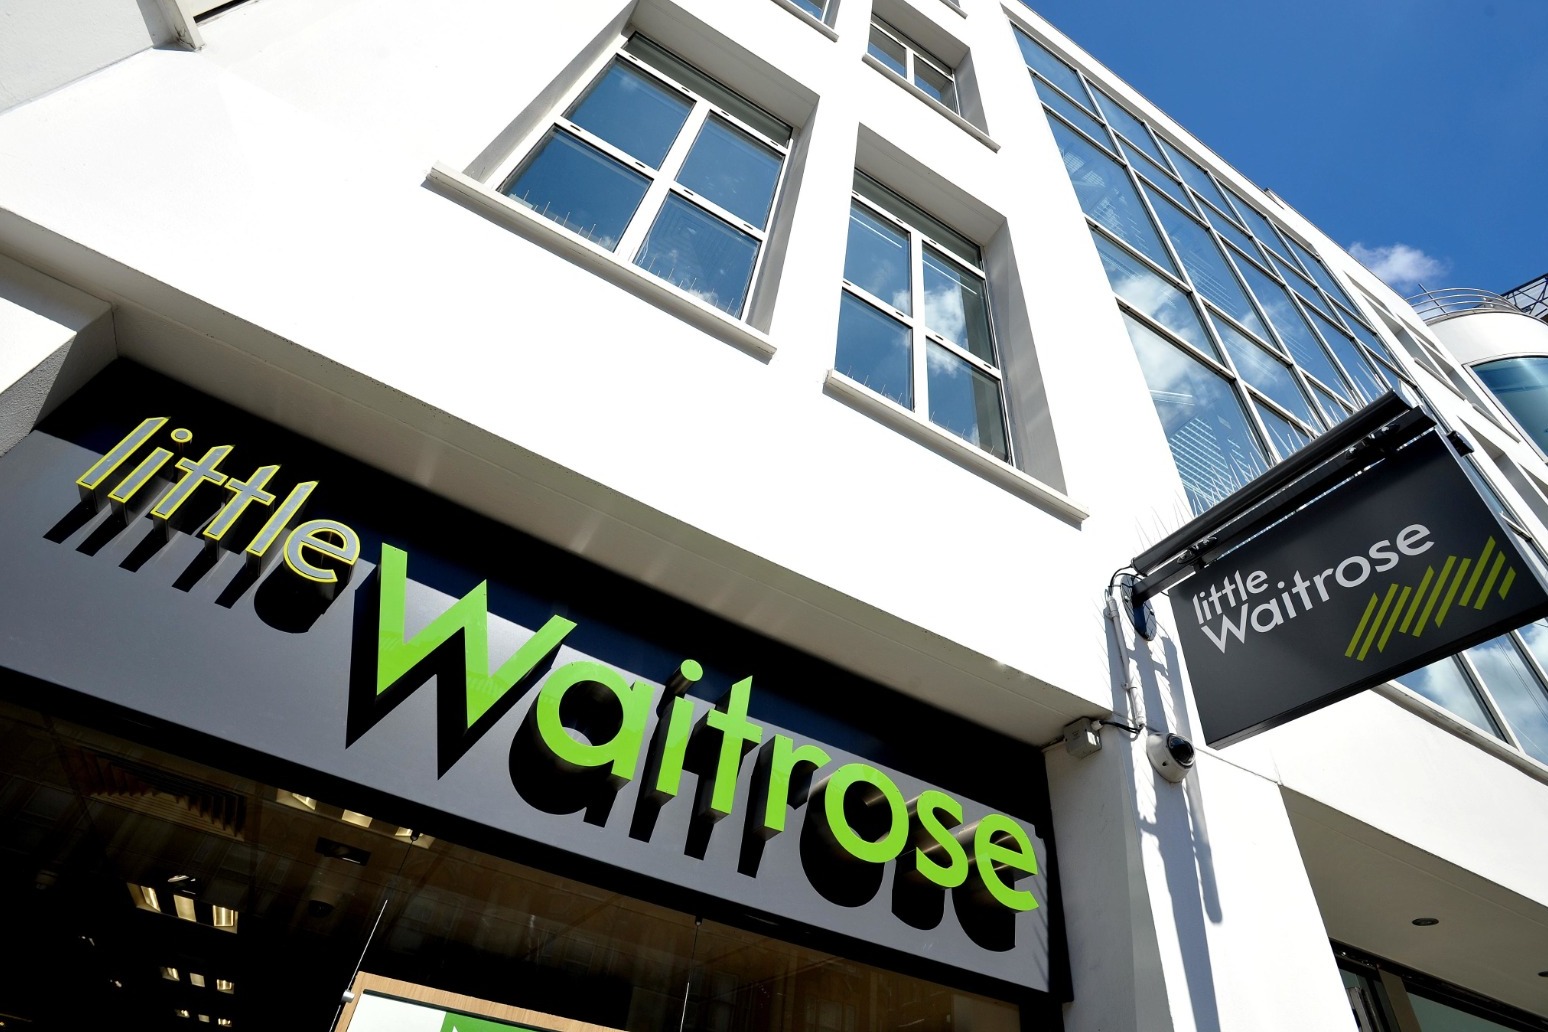 Waitrose to invest £100m in cutting prices of own-brand groceries 